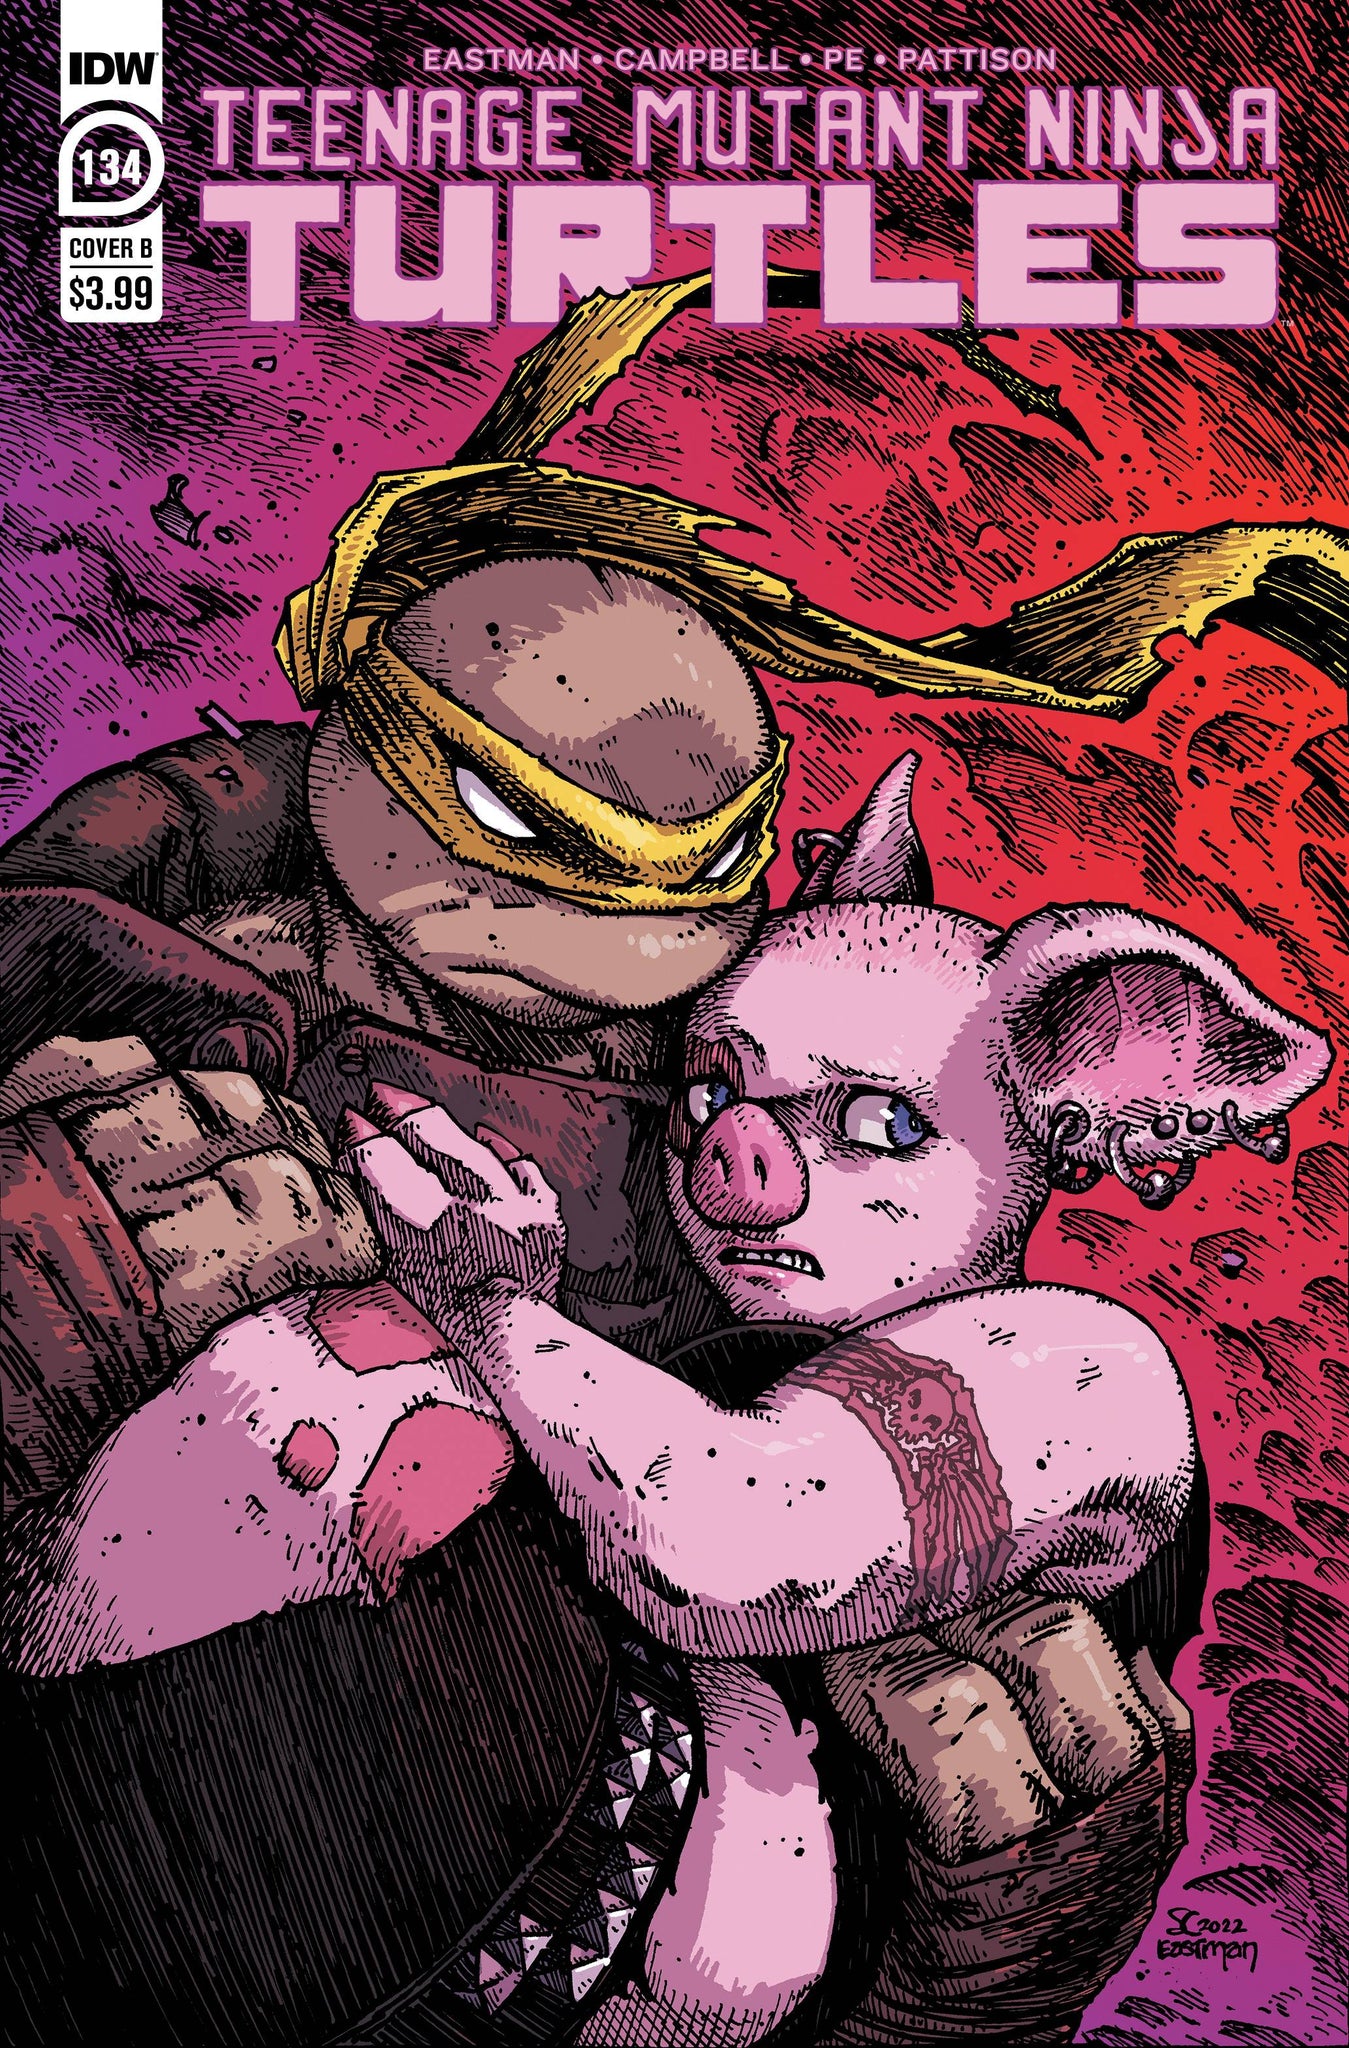 TMNT ONGOING #134  (C: 1-0-0)